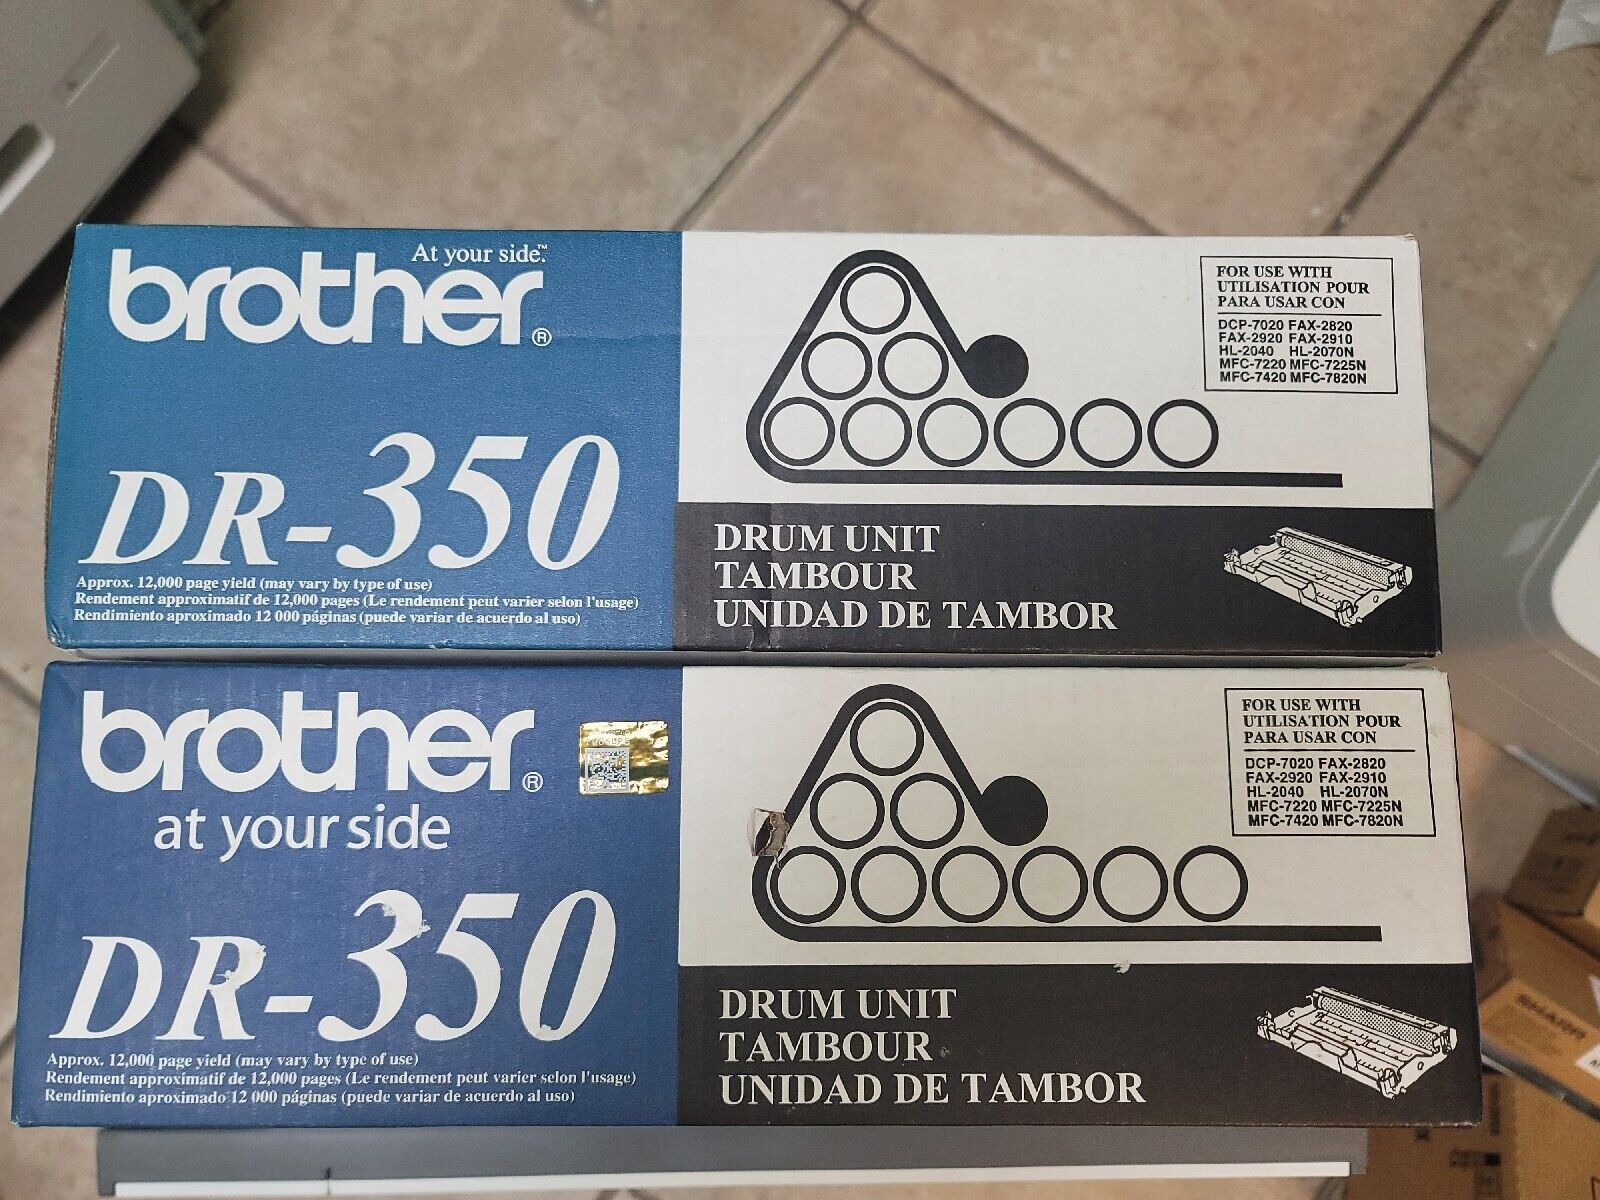 New OEM Brother DR-350 drum units